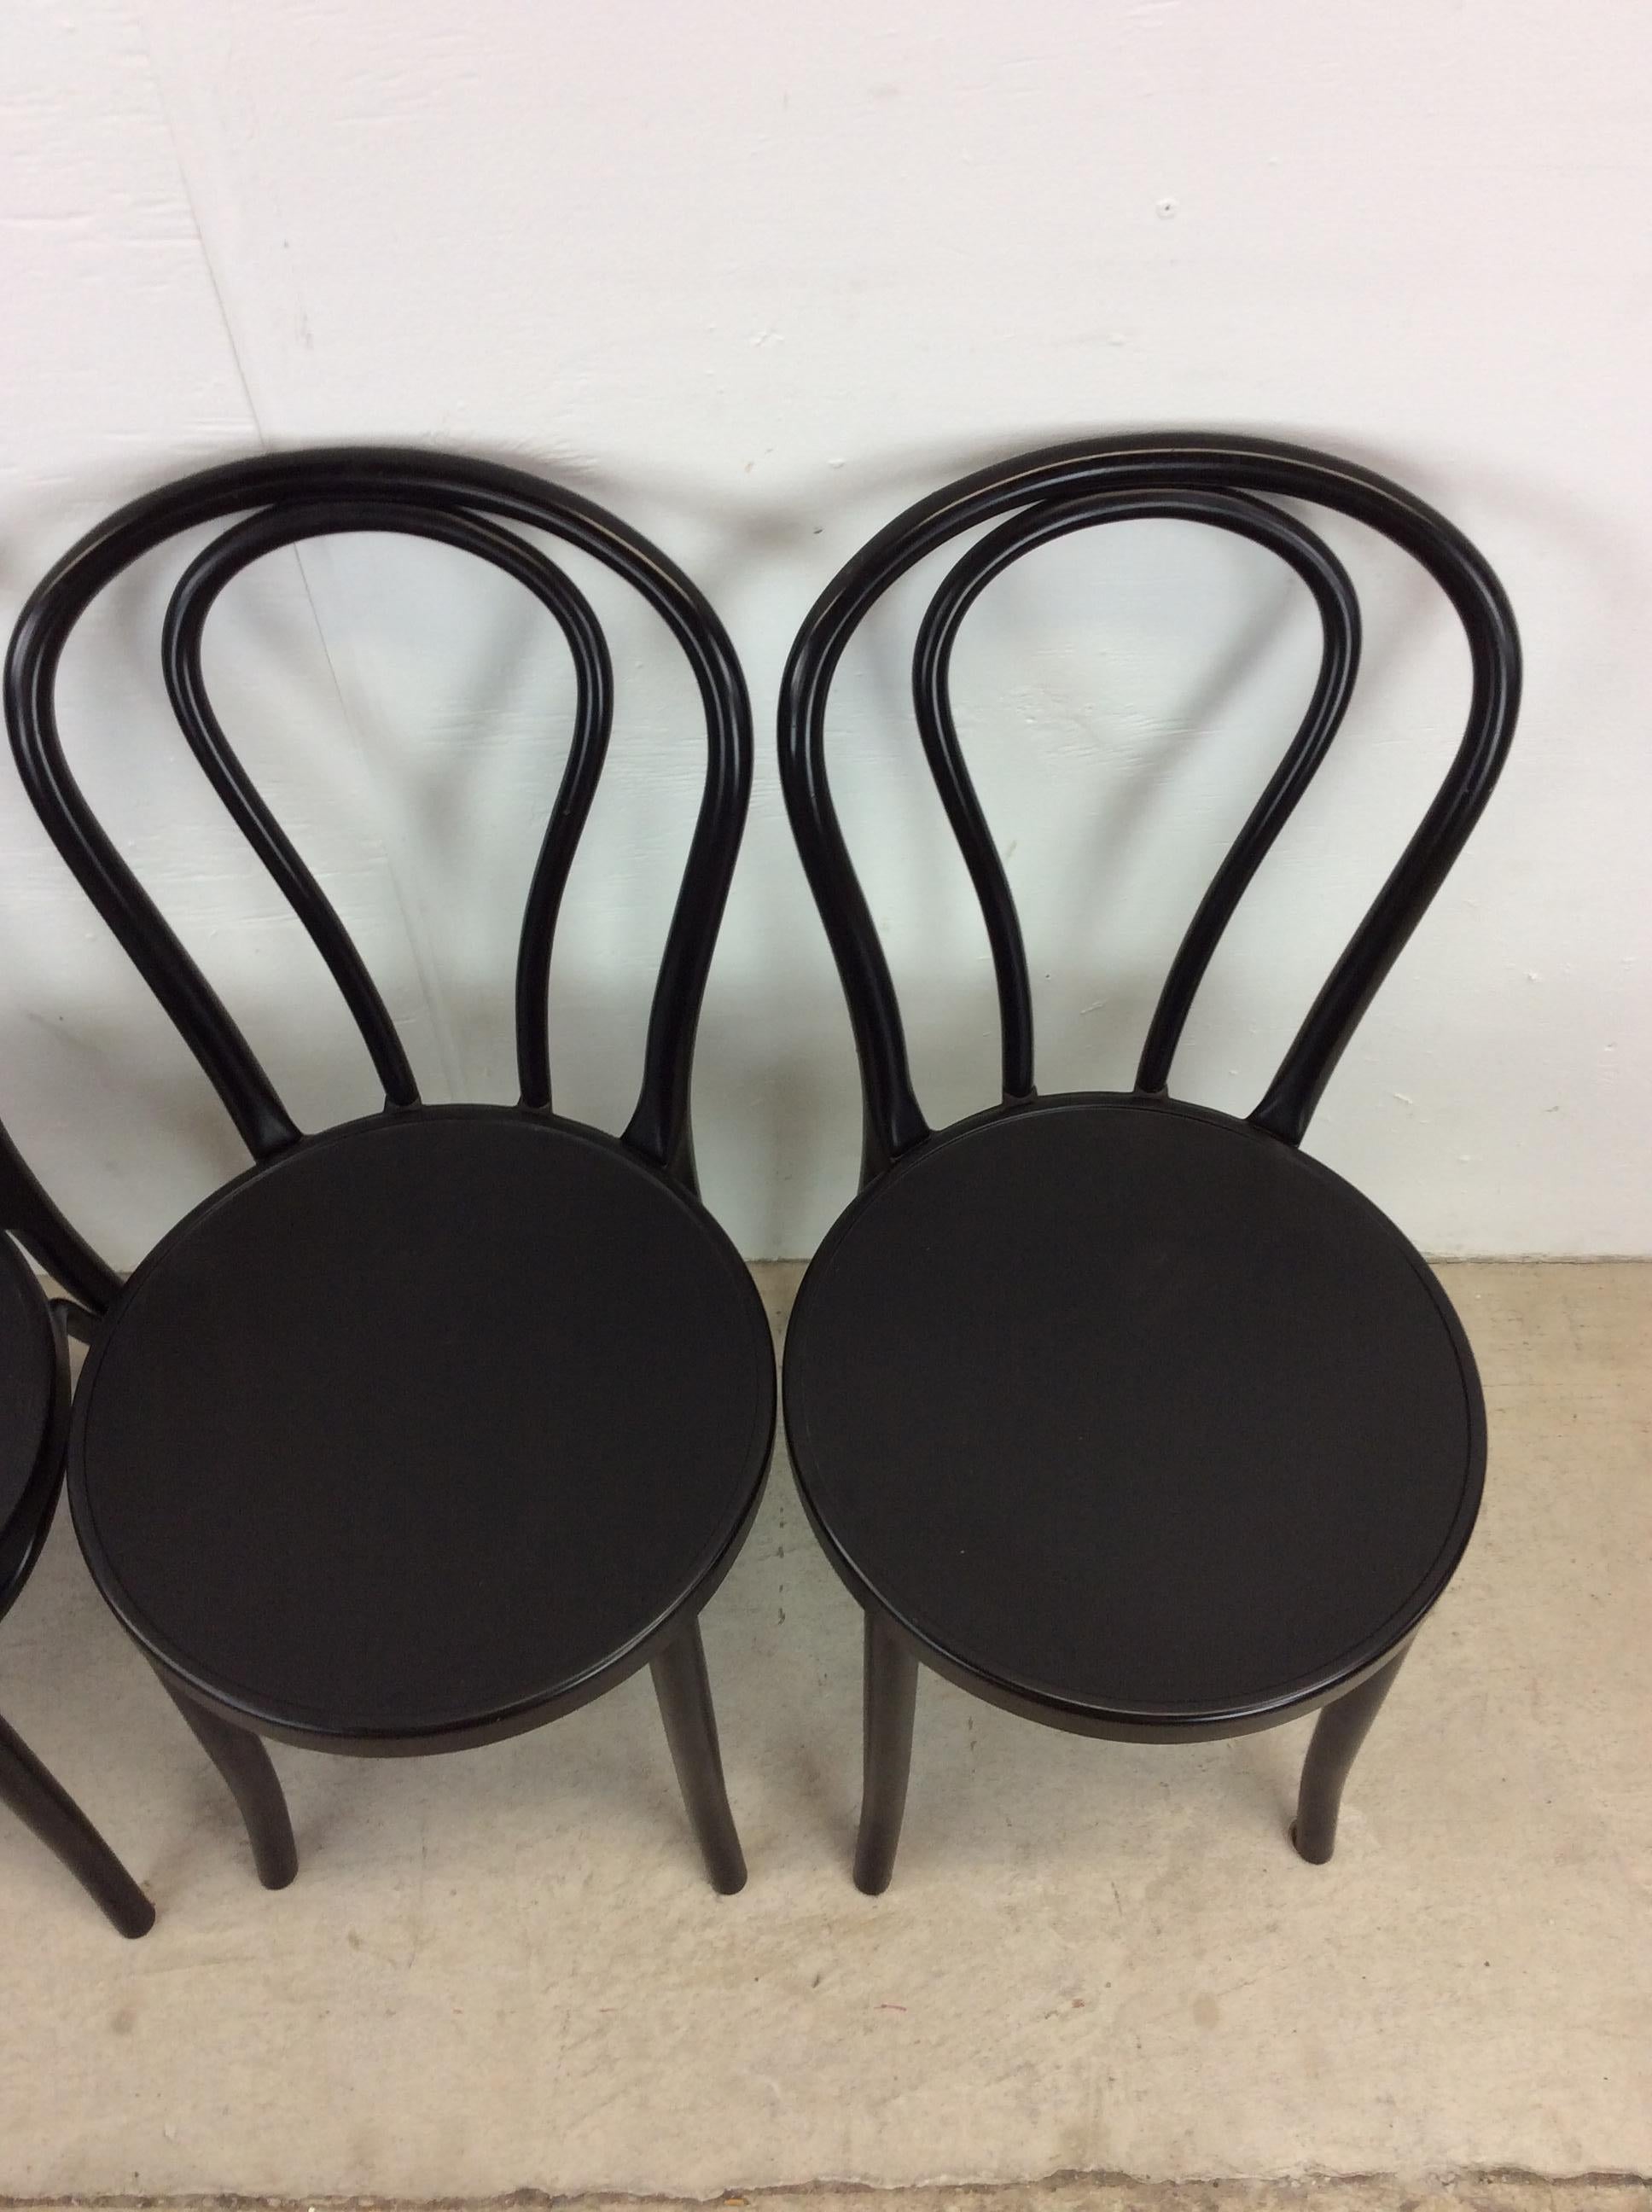 French Provincial Set of 4 Vintage IKEA Black Cafe Style Chairs